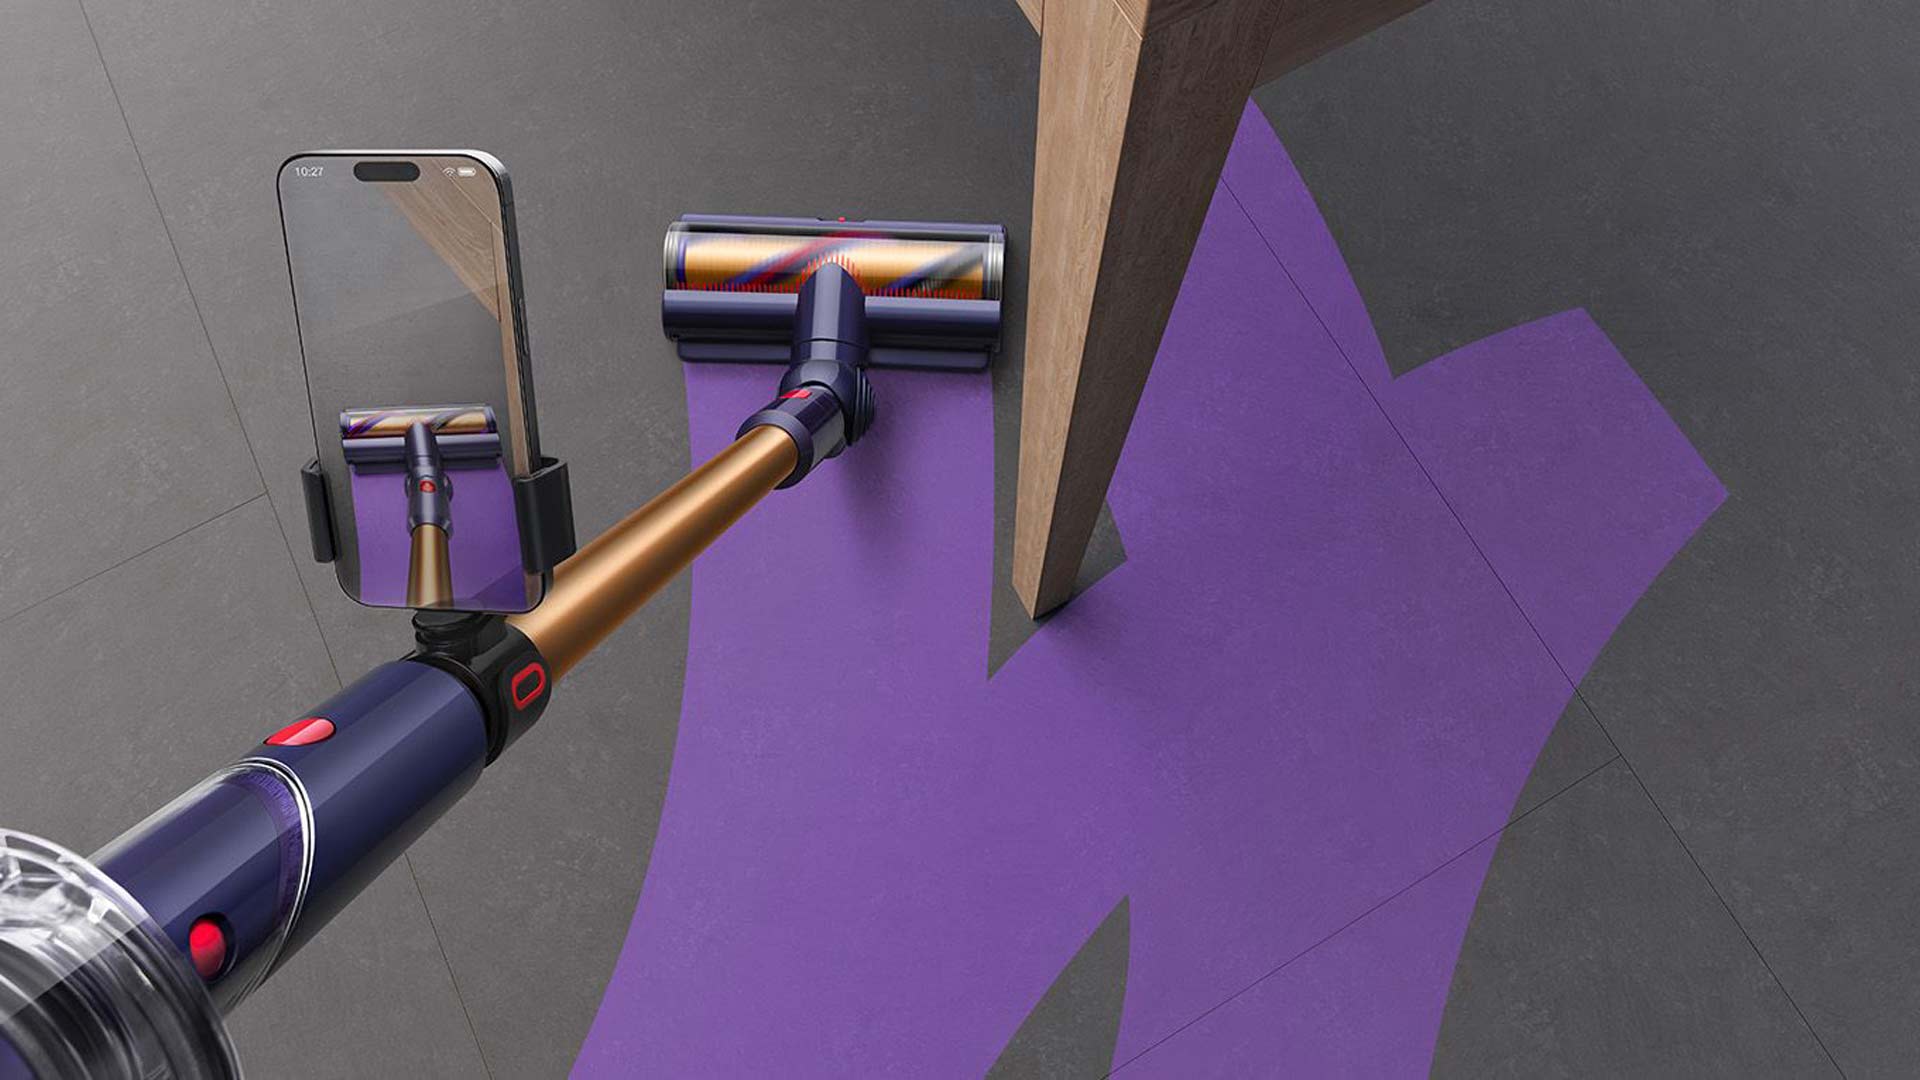 Dyson is Actually Building that Viral AR Vacuuming App, But Only for iPhone [Video]